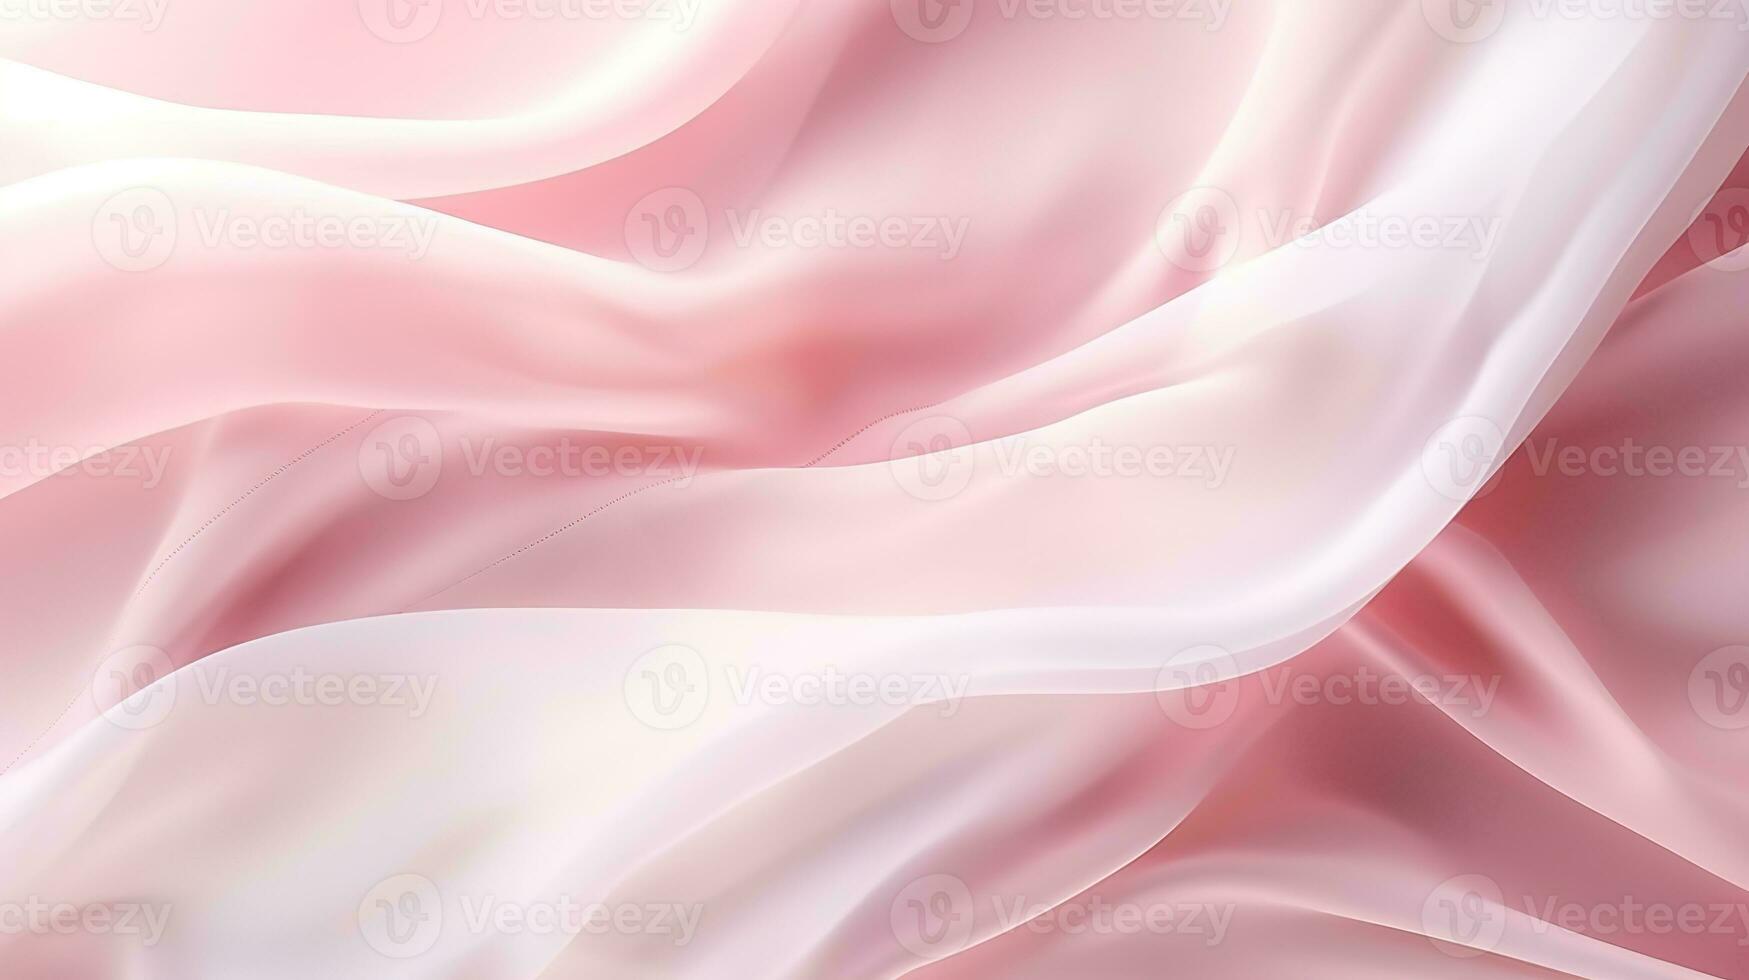 Abstract White and Pink Textile Transparent Fabric, soft Light Background for Beauty Products photo